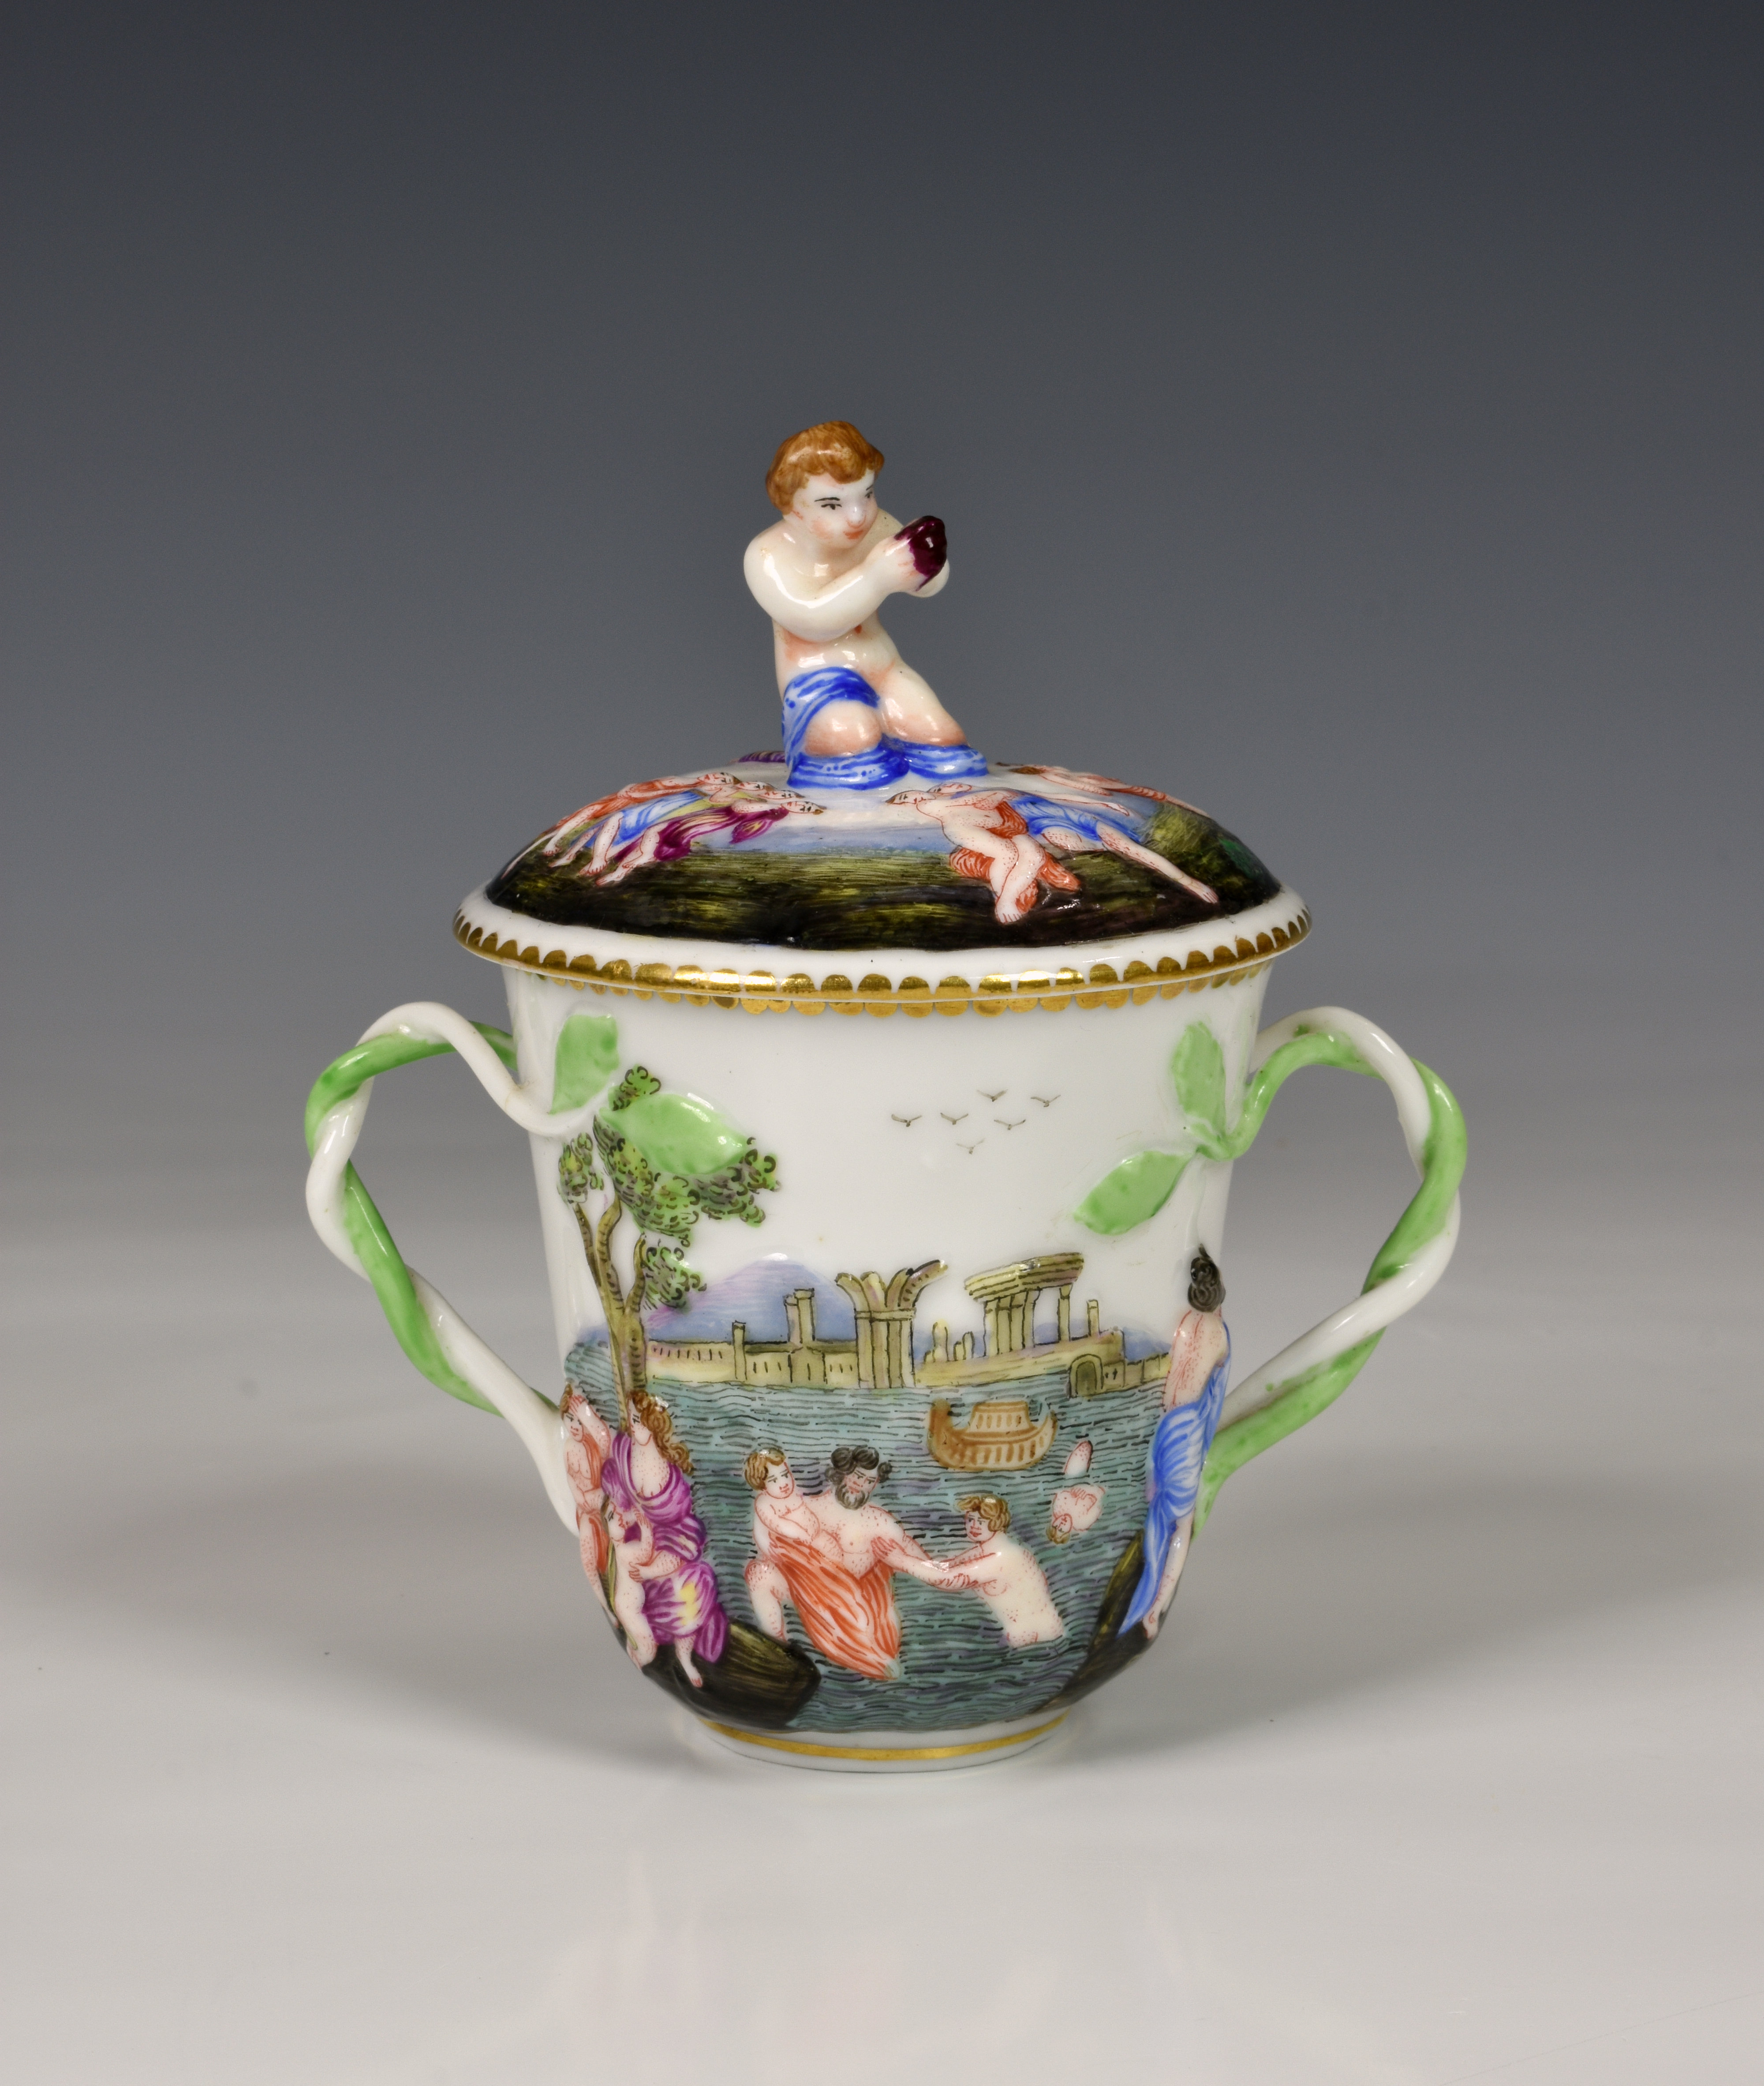 A 19th century Capodimonte chocolate cup and cover, of typical form decorated with figures bathing